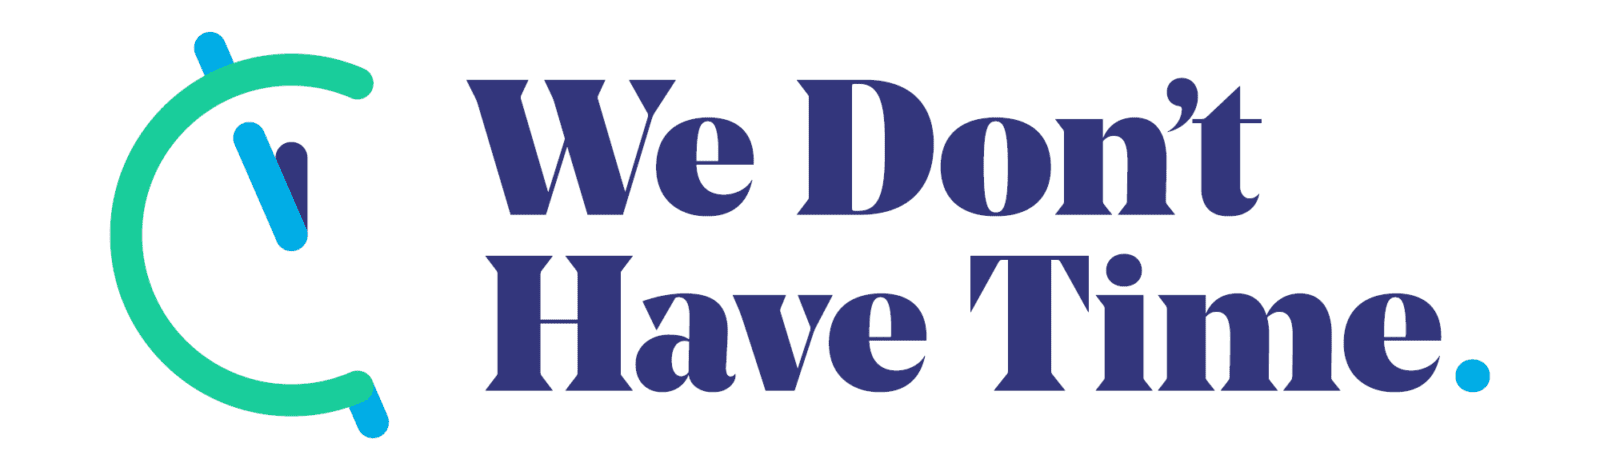 We don't have the time logo